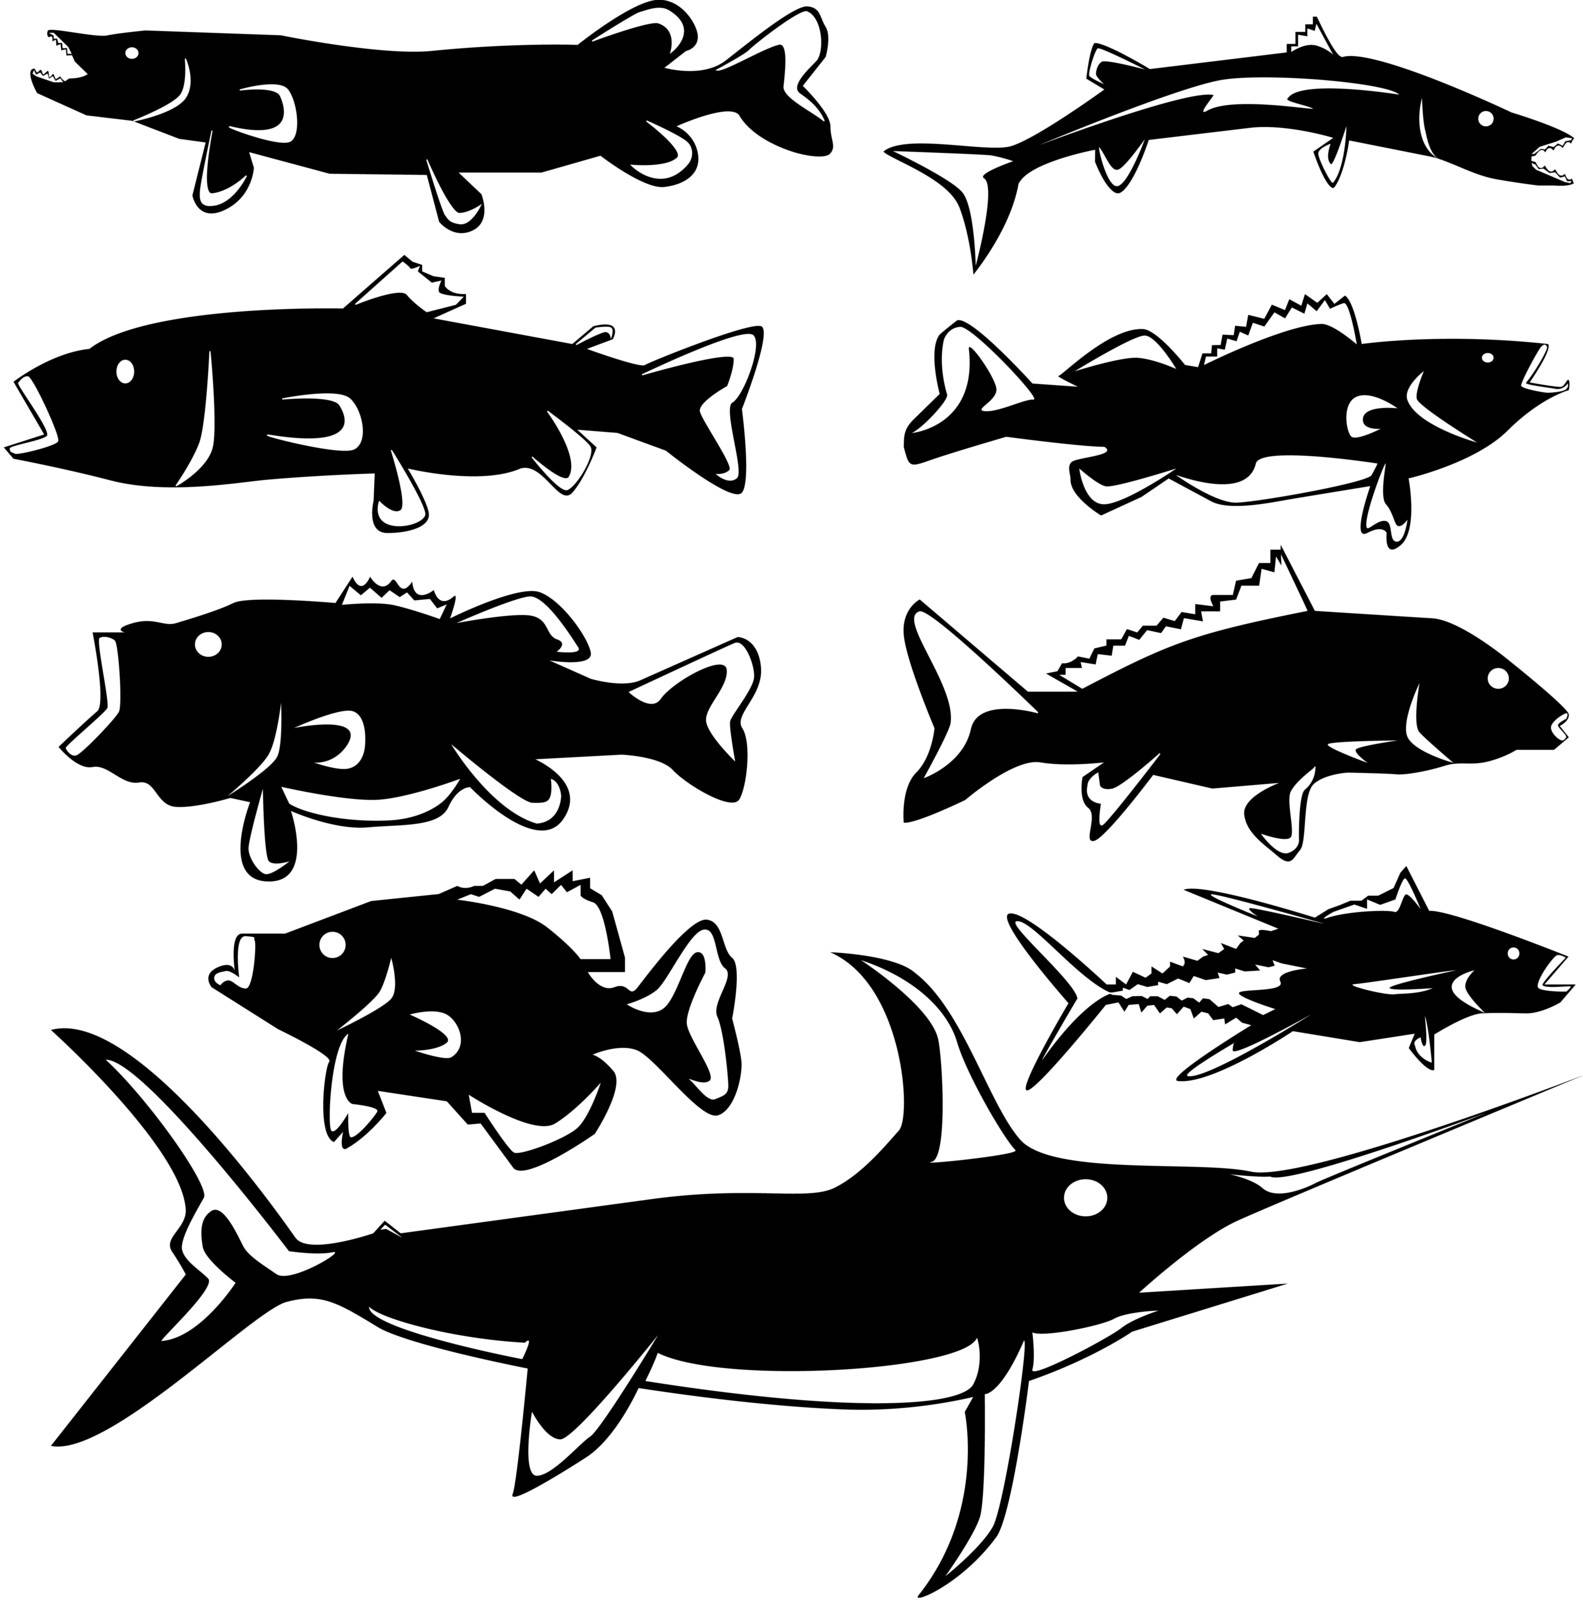 Freshwater and saltwater fish in vector silhouette with stylized illustration